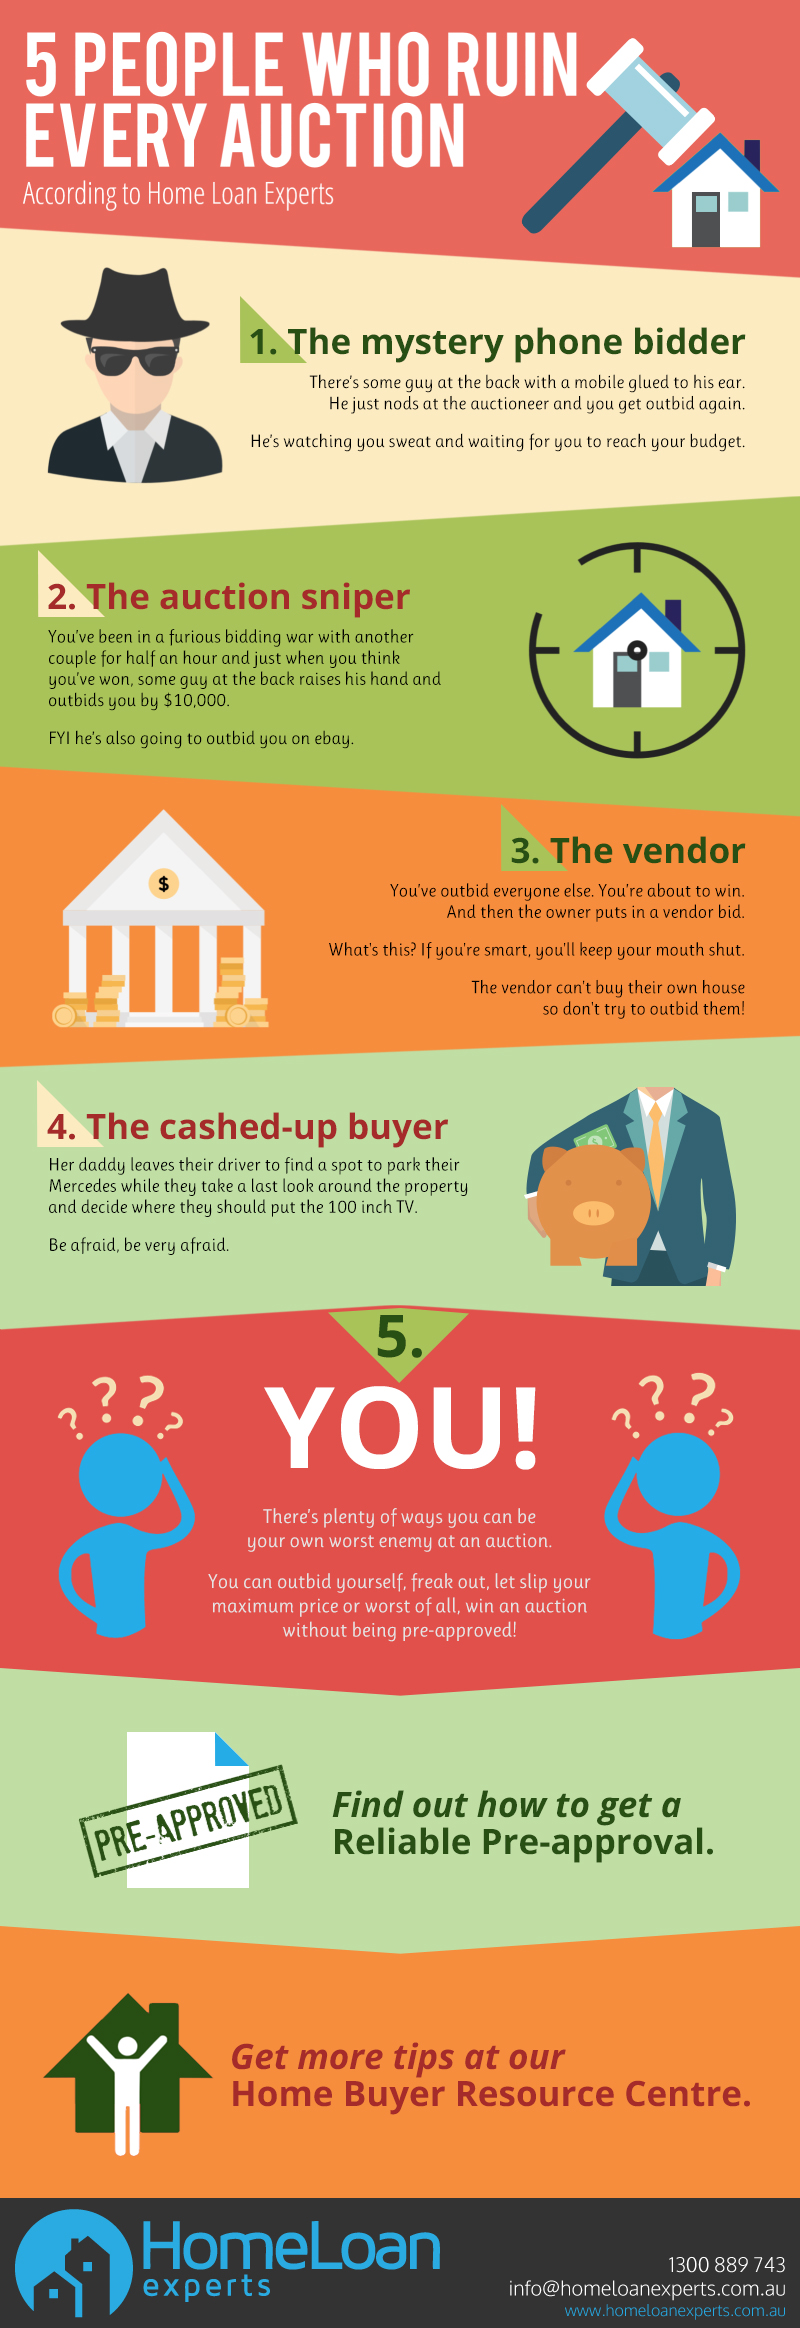 5 People Who Ruin Every Auction infographic